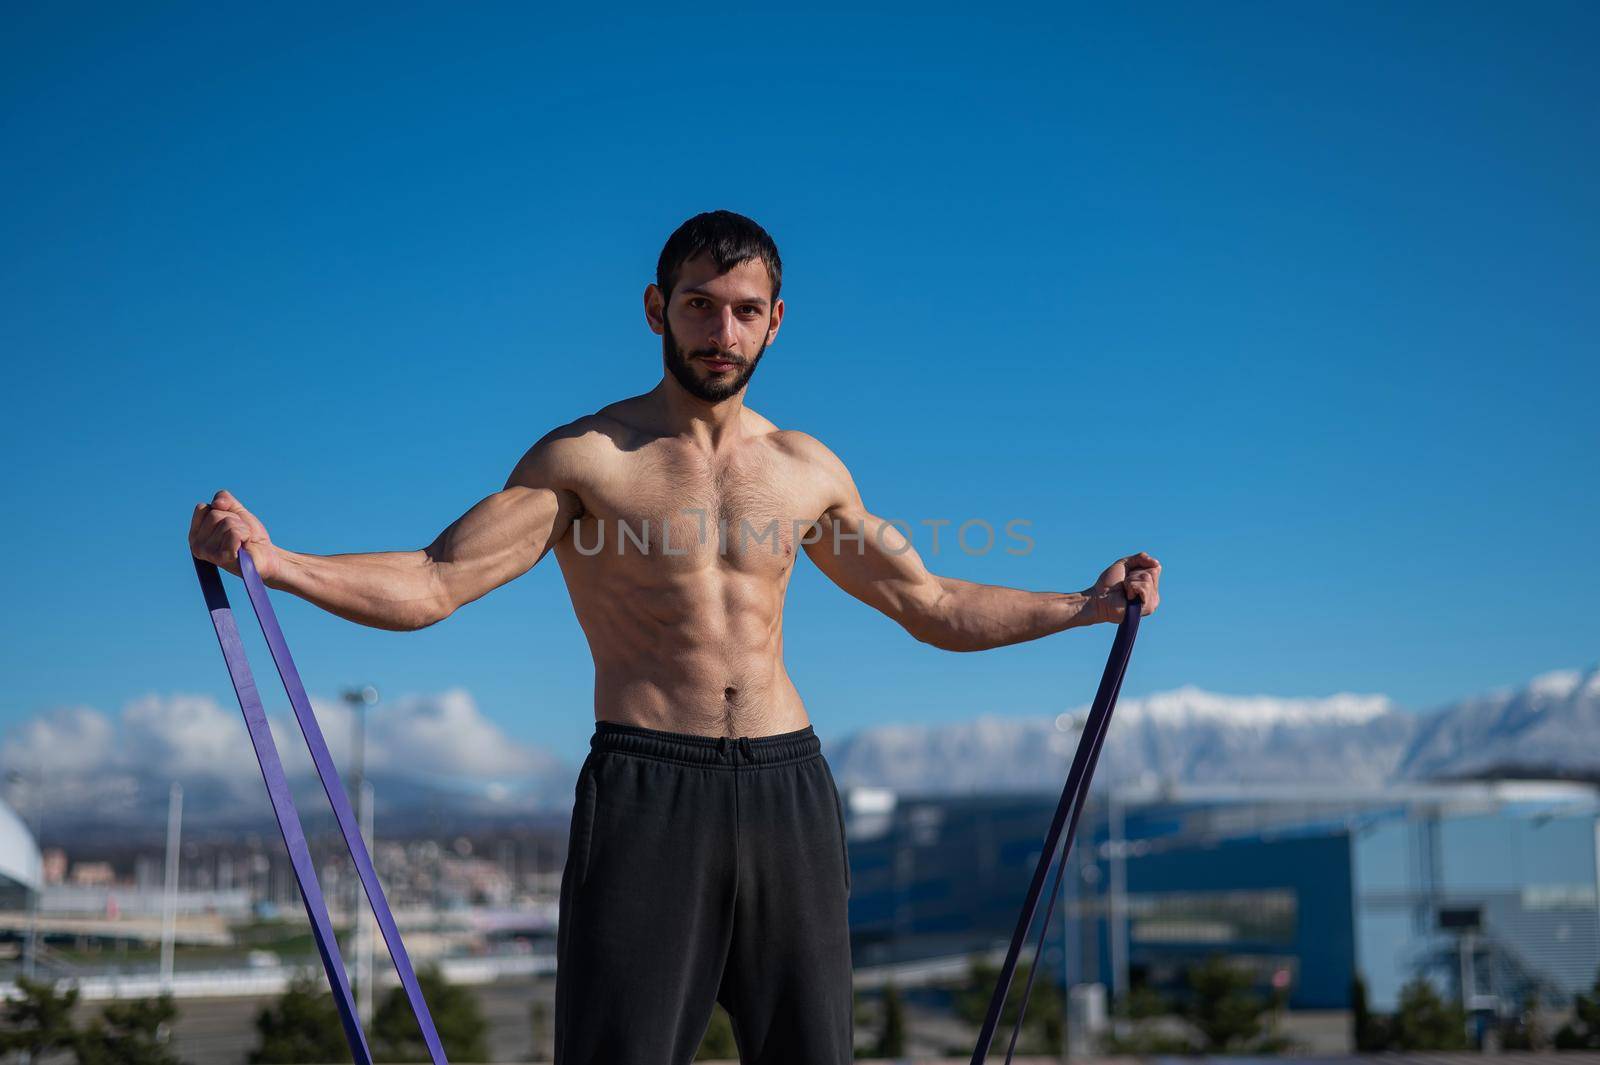 Shirtless man doing exercise with rubber bands outdoors. by mrwed54